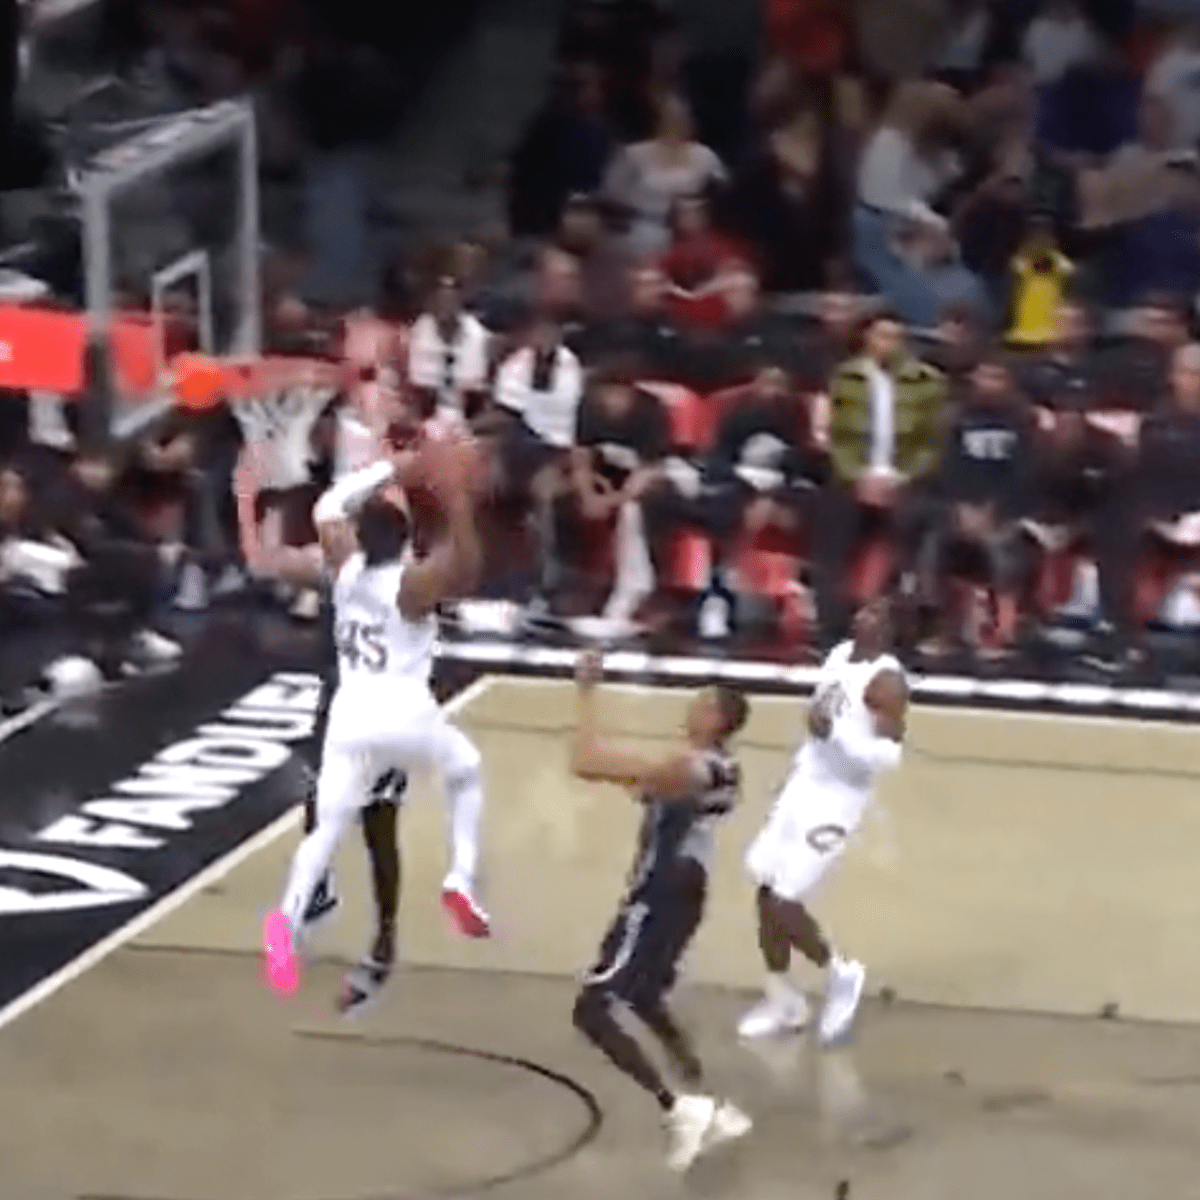 Basketball World Reacts To Donovan Mitchell's Insane Dunk - The